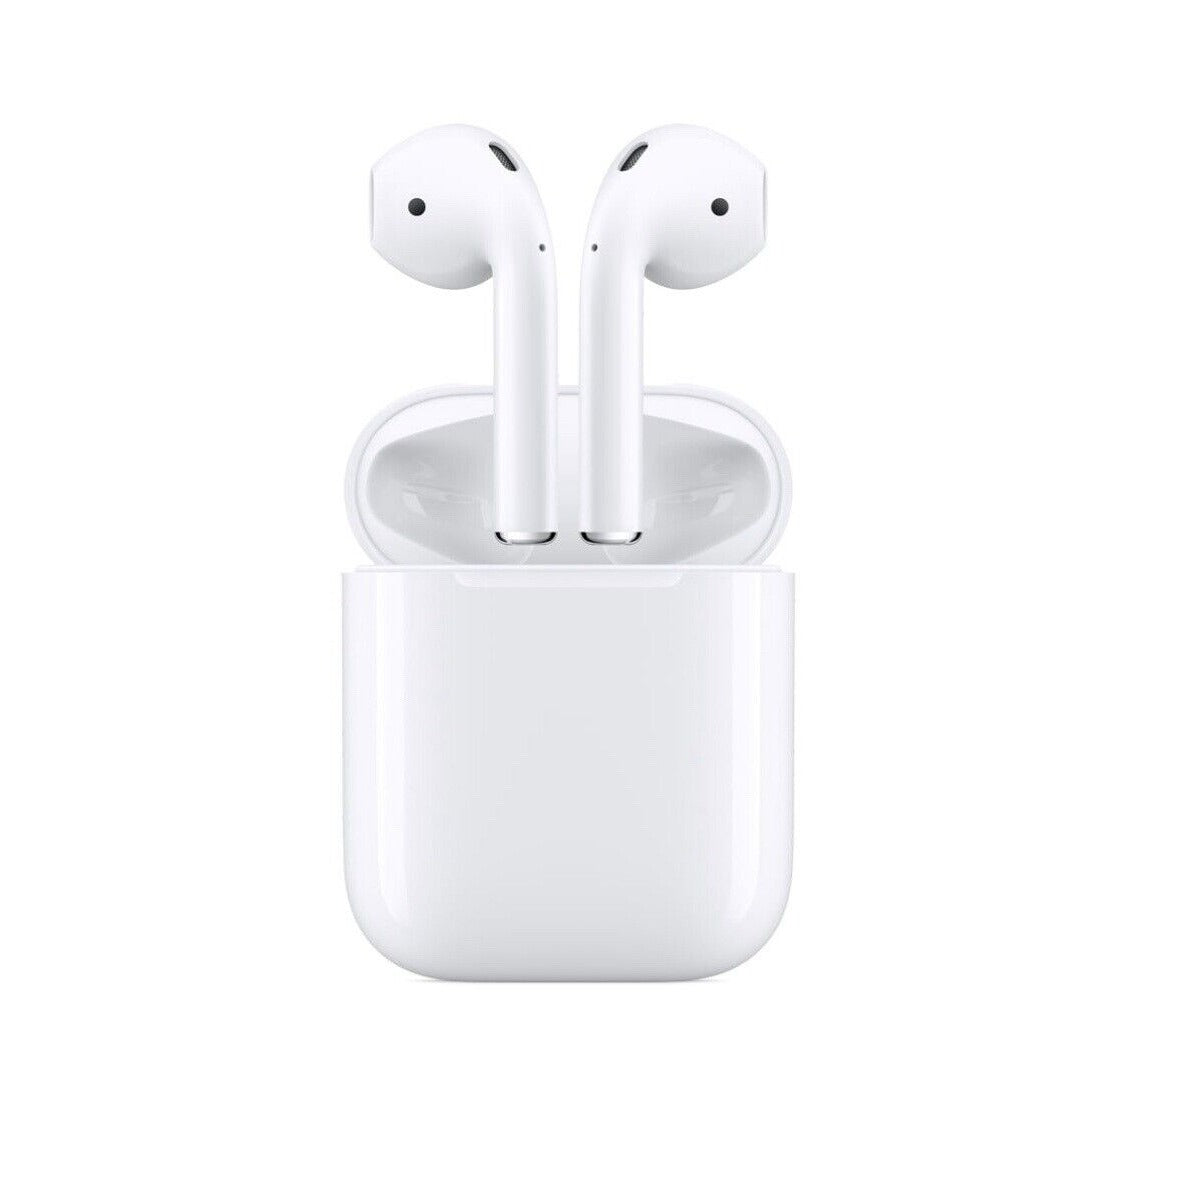 White Apple AirPods 2nd Generation with Charging Case